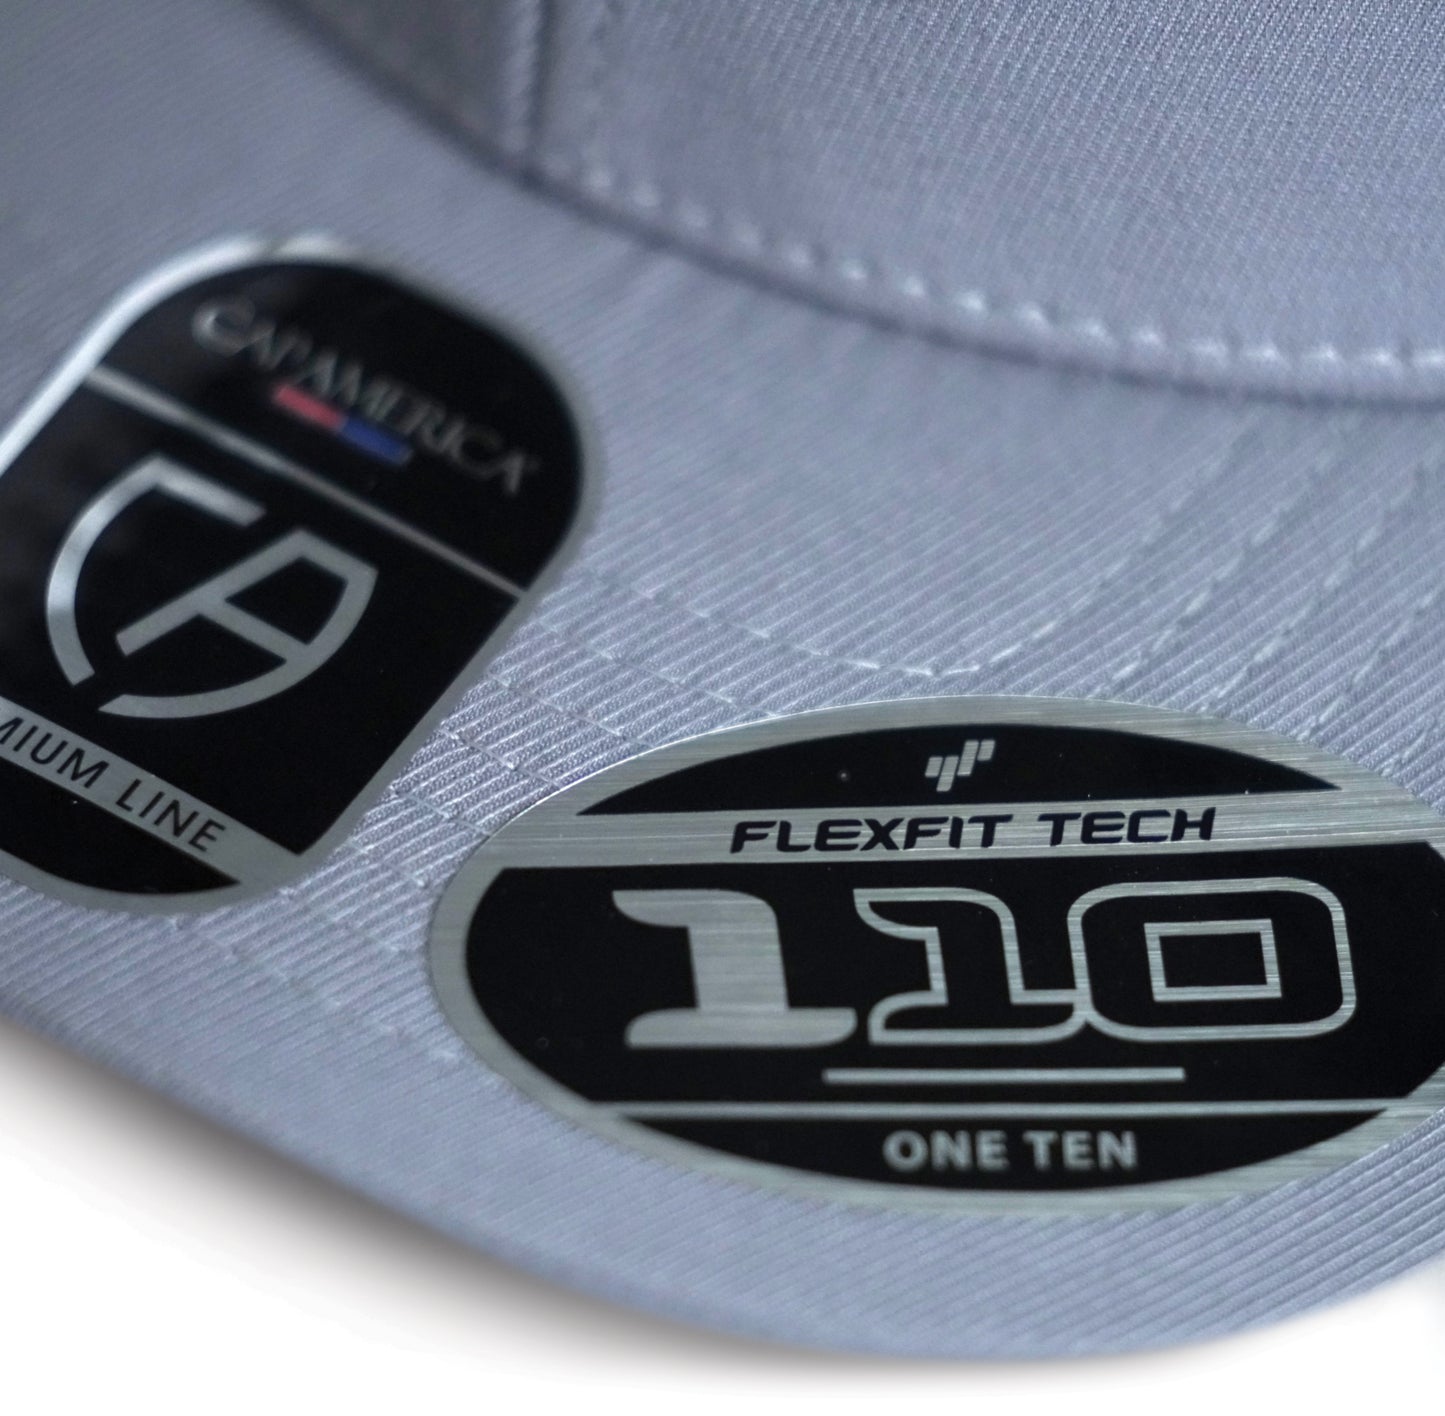 Icon Cap by Gamebore - Chalk Grey